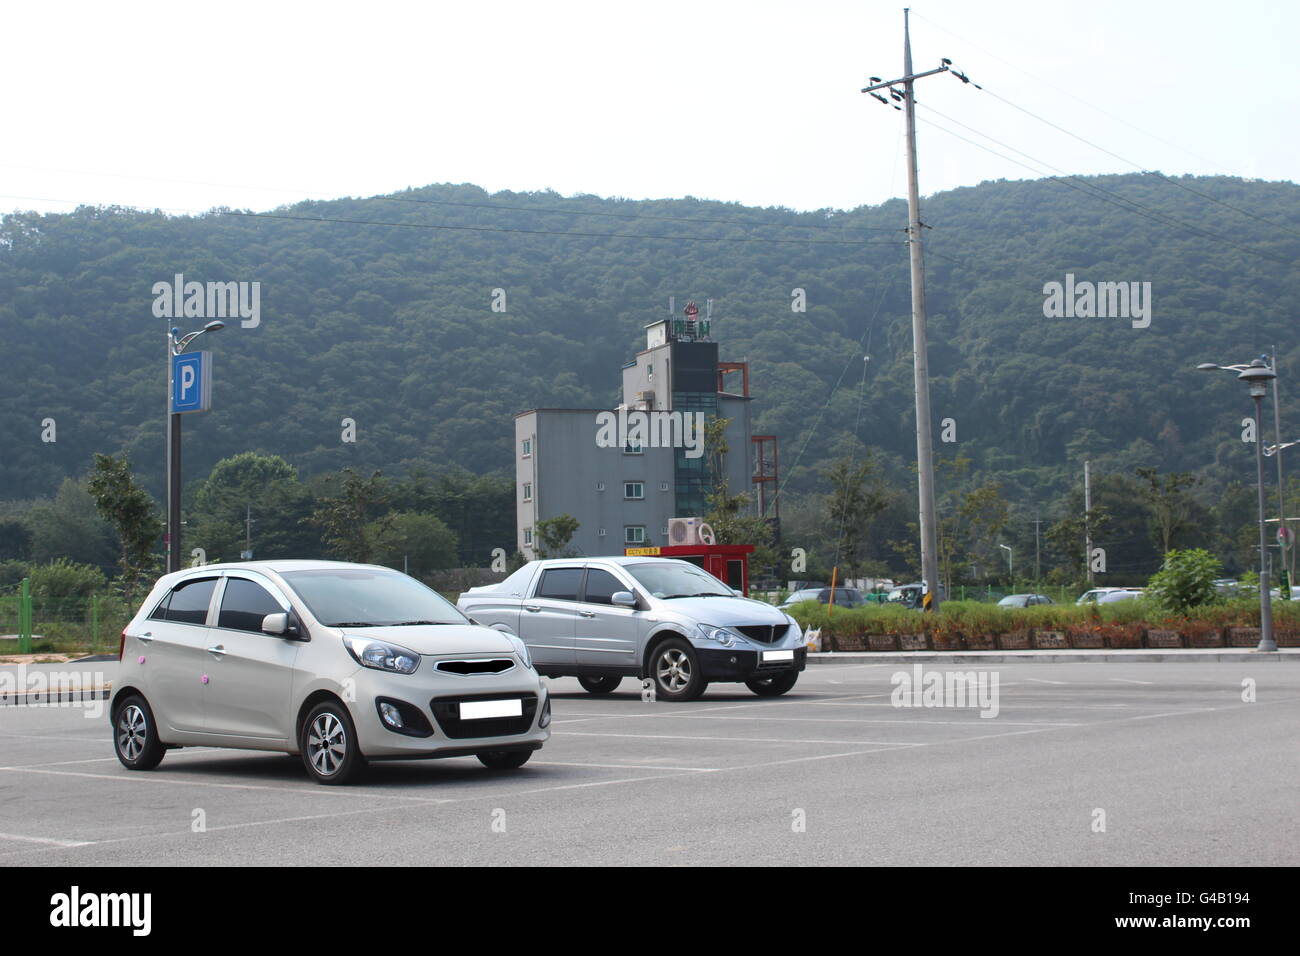 Cars at the foot of a mountain in Korea Stock Photo